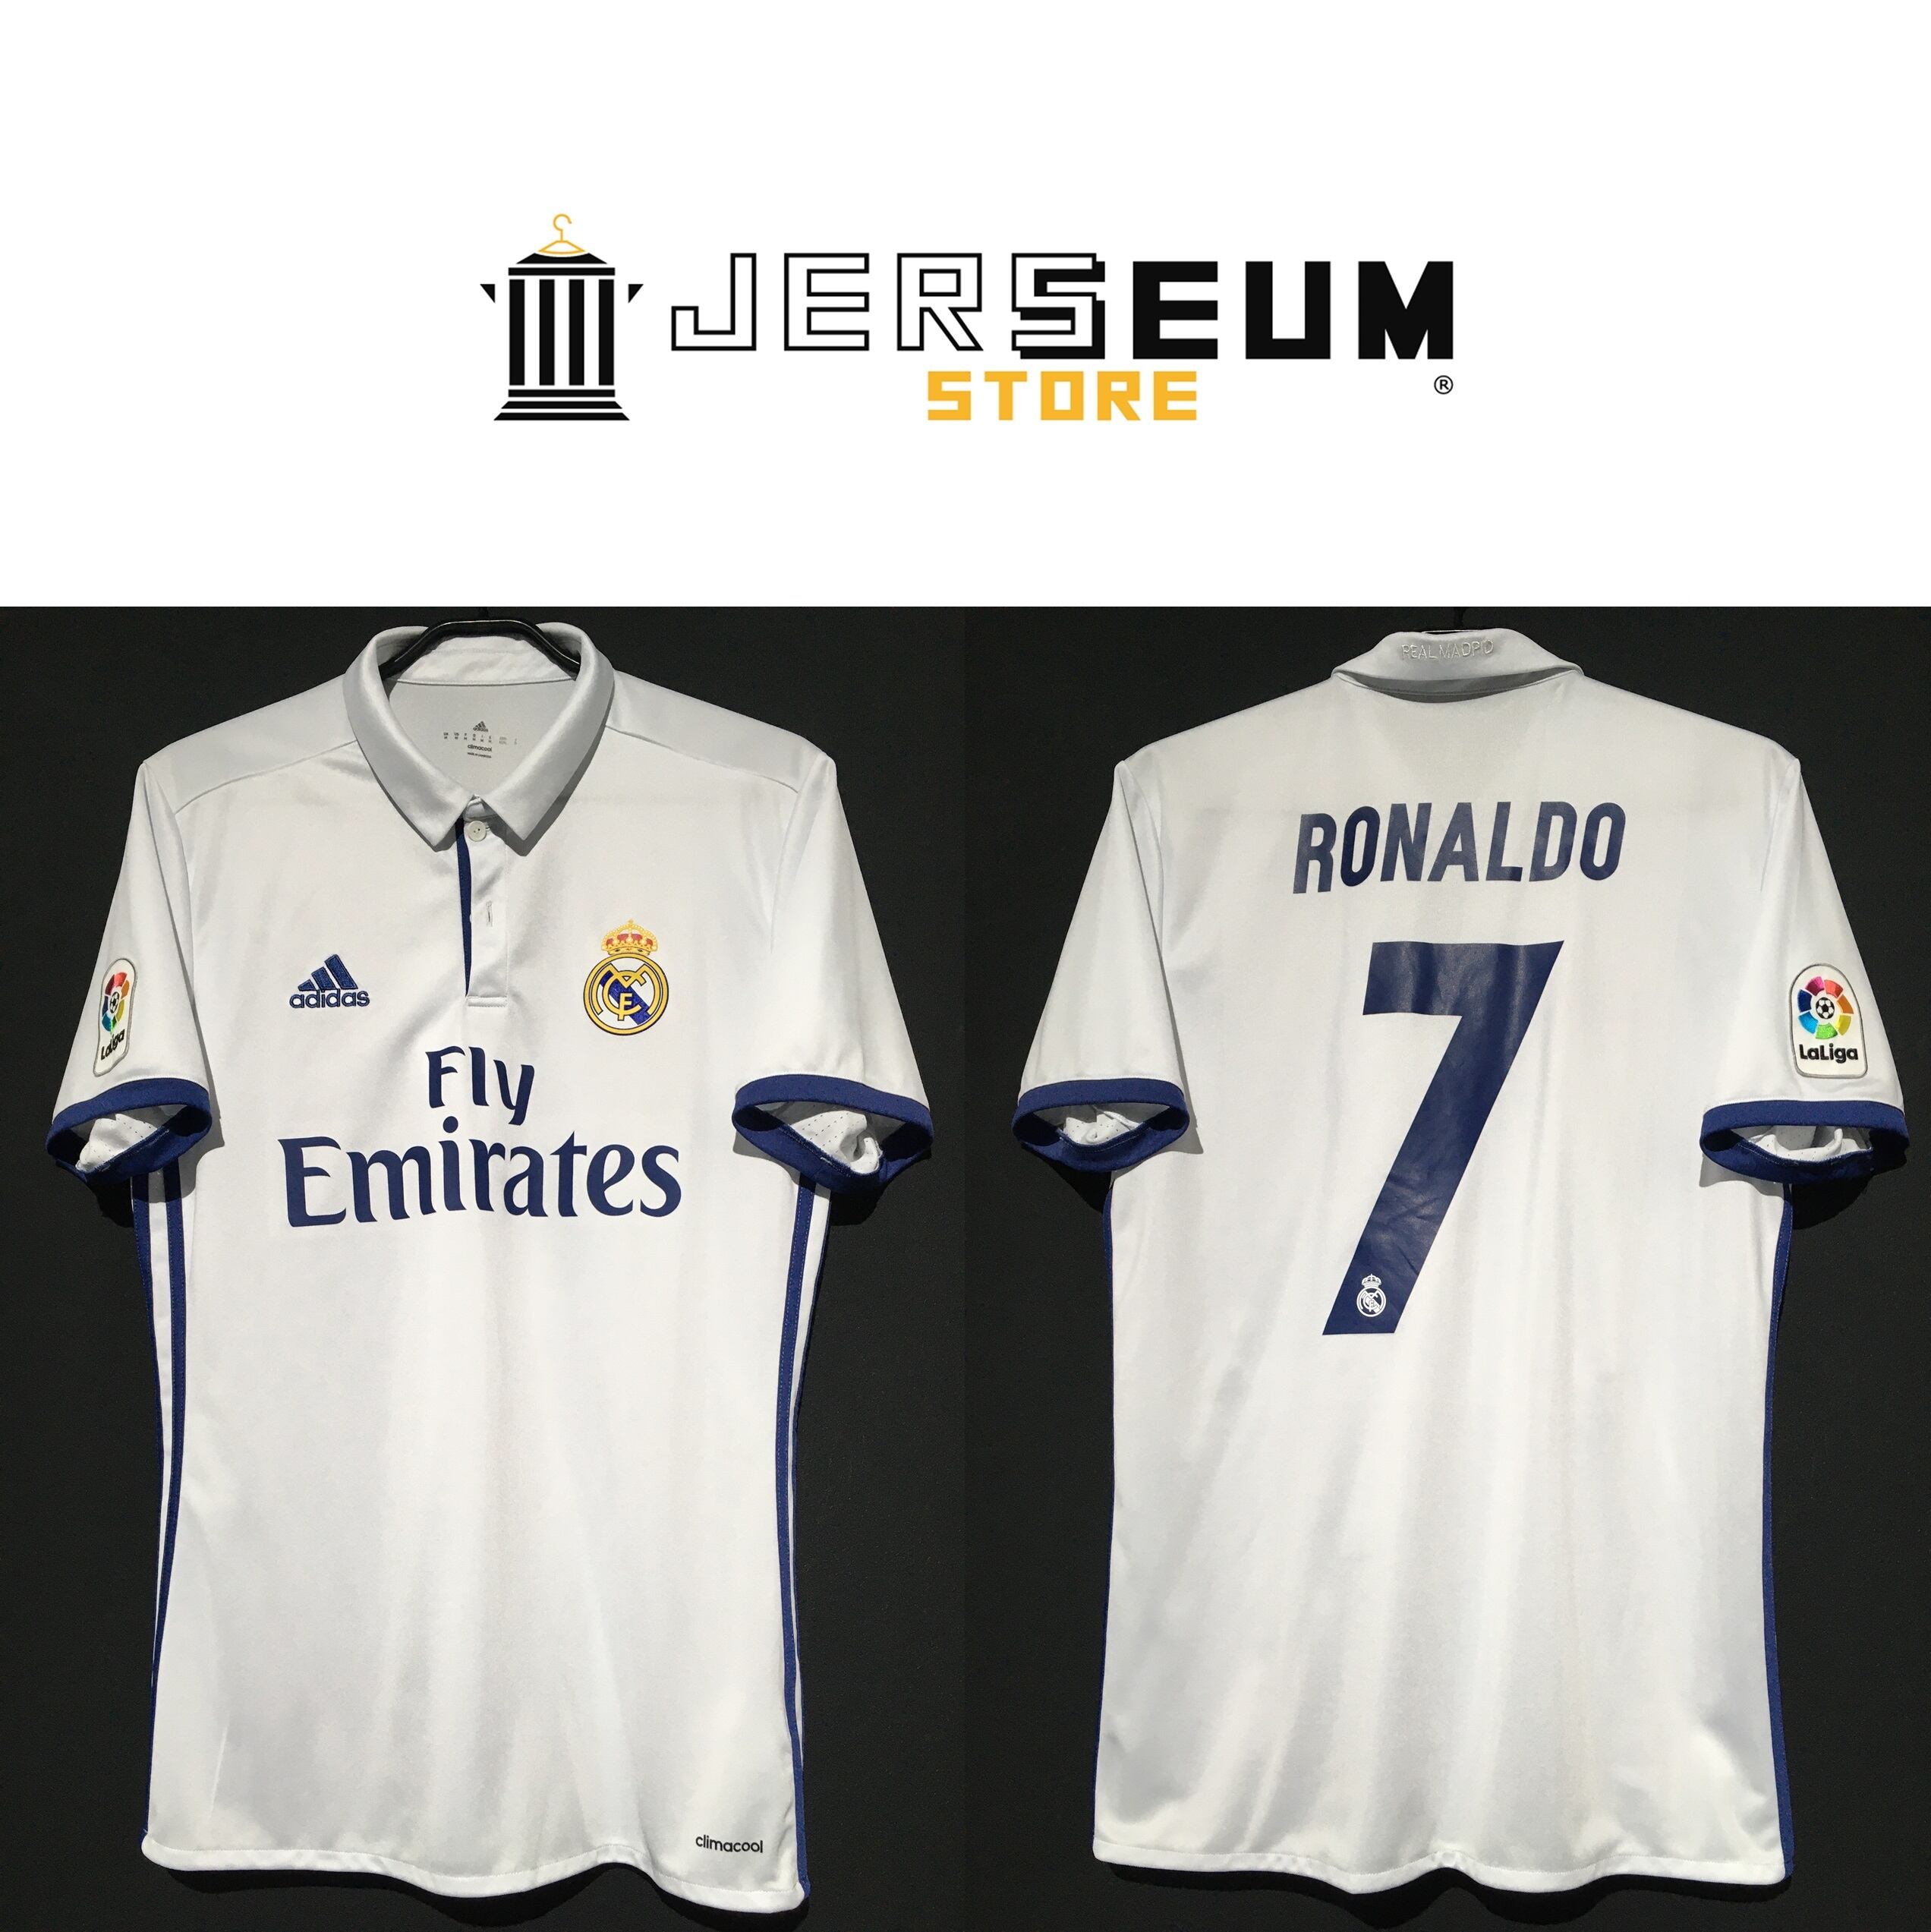 2016/17】 Real Madrid Condition：Preowned Grade：8 Size：M  No.7 RONALDO Jerseum Store